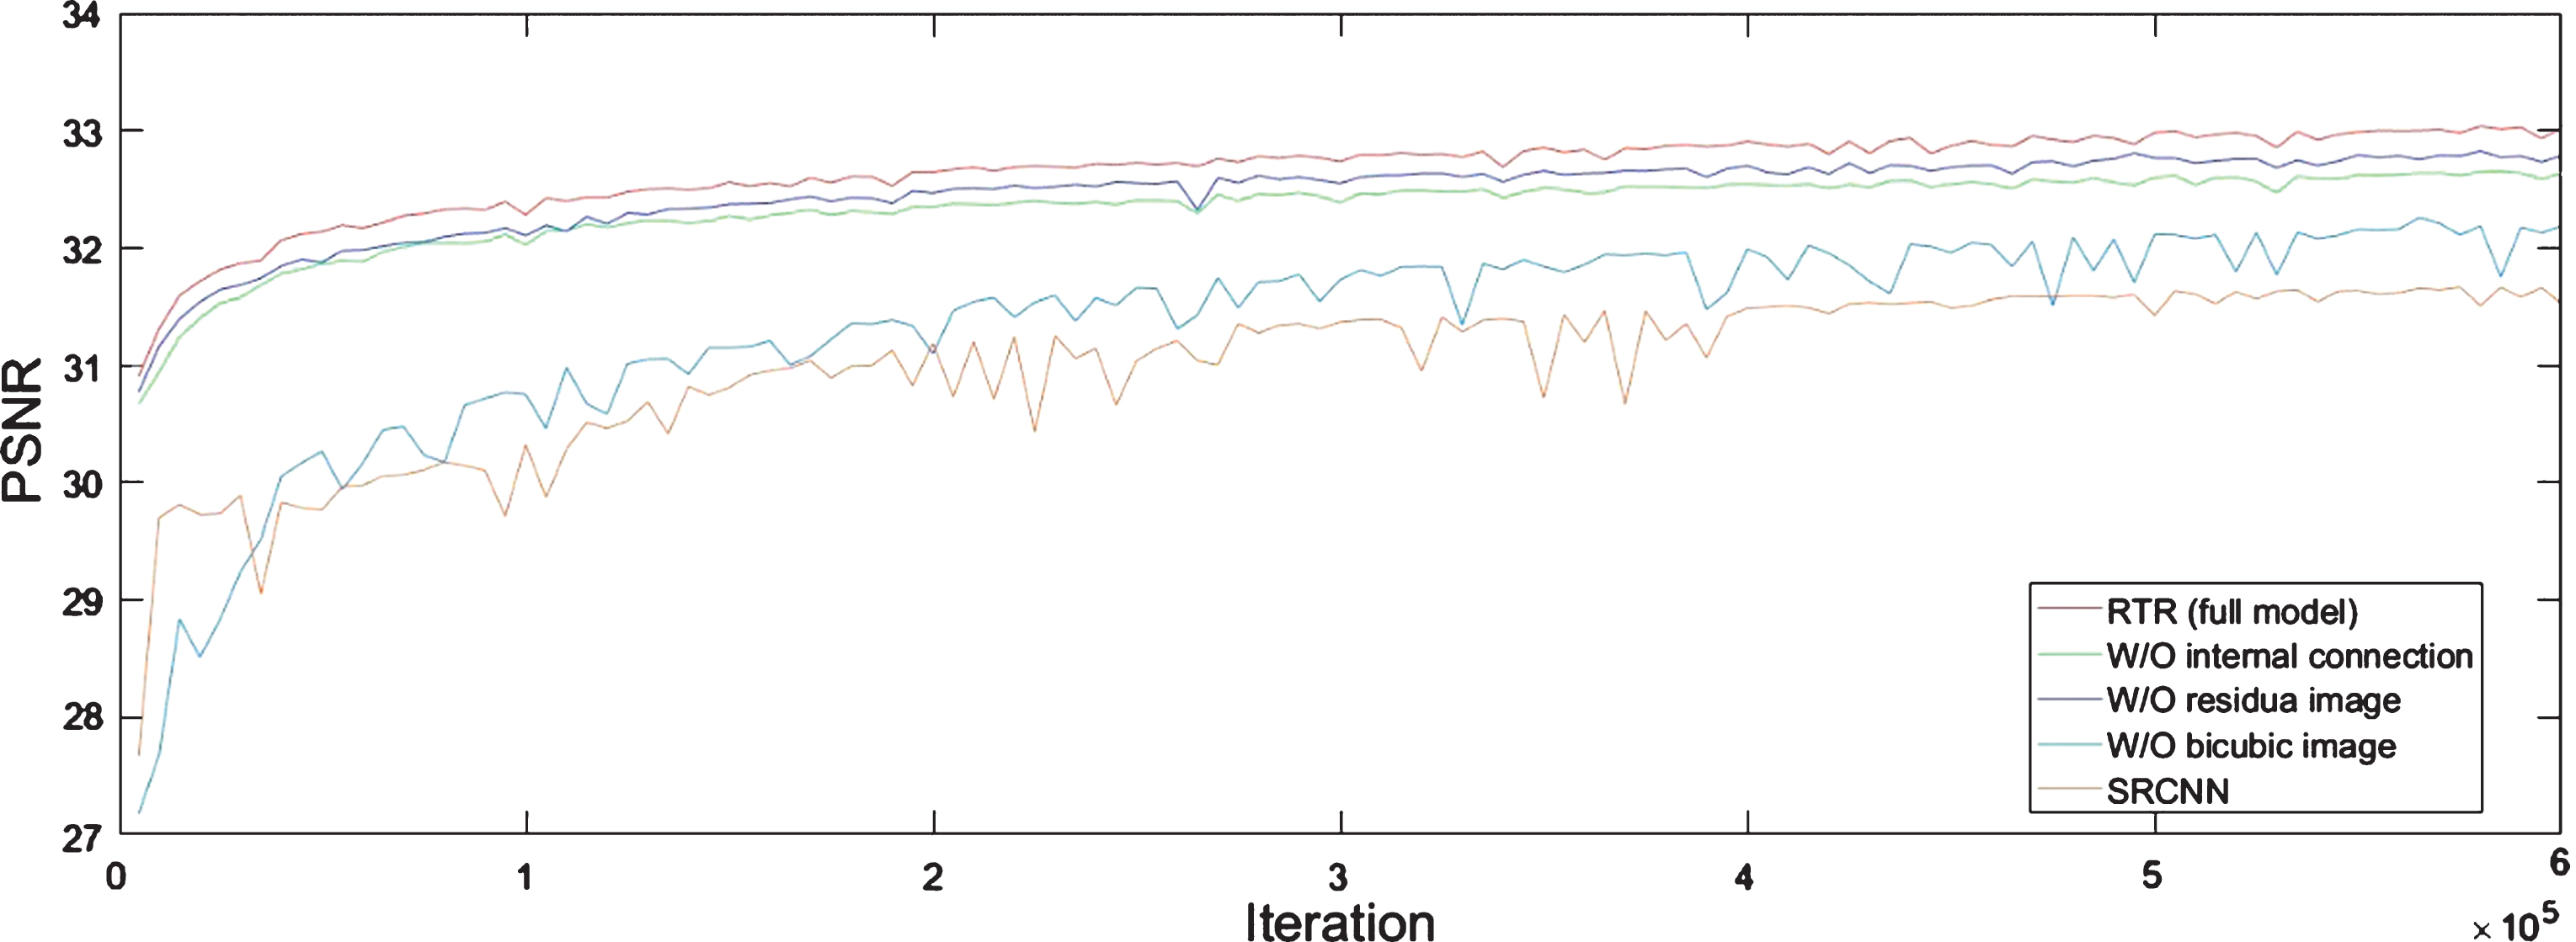 Performance curves for different networks on the test dataset with an up-sampling factor 2.